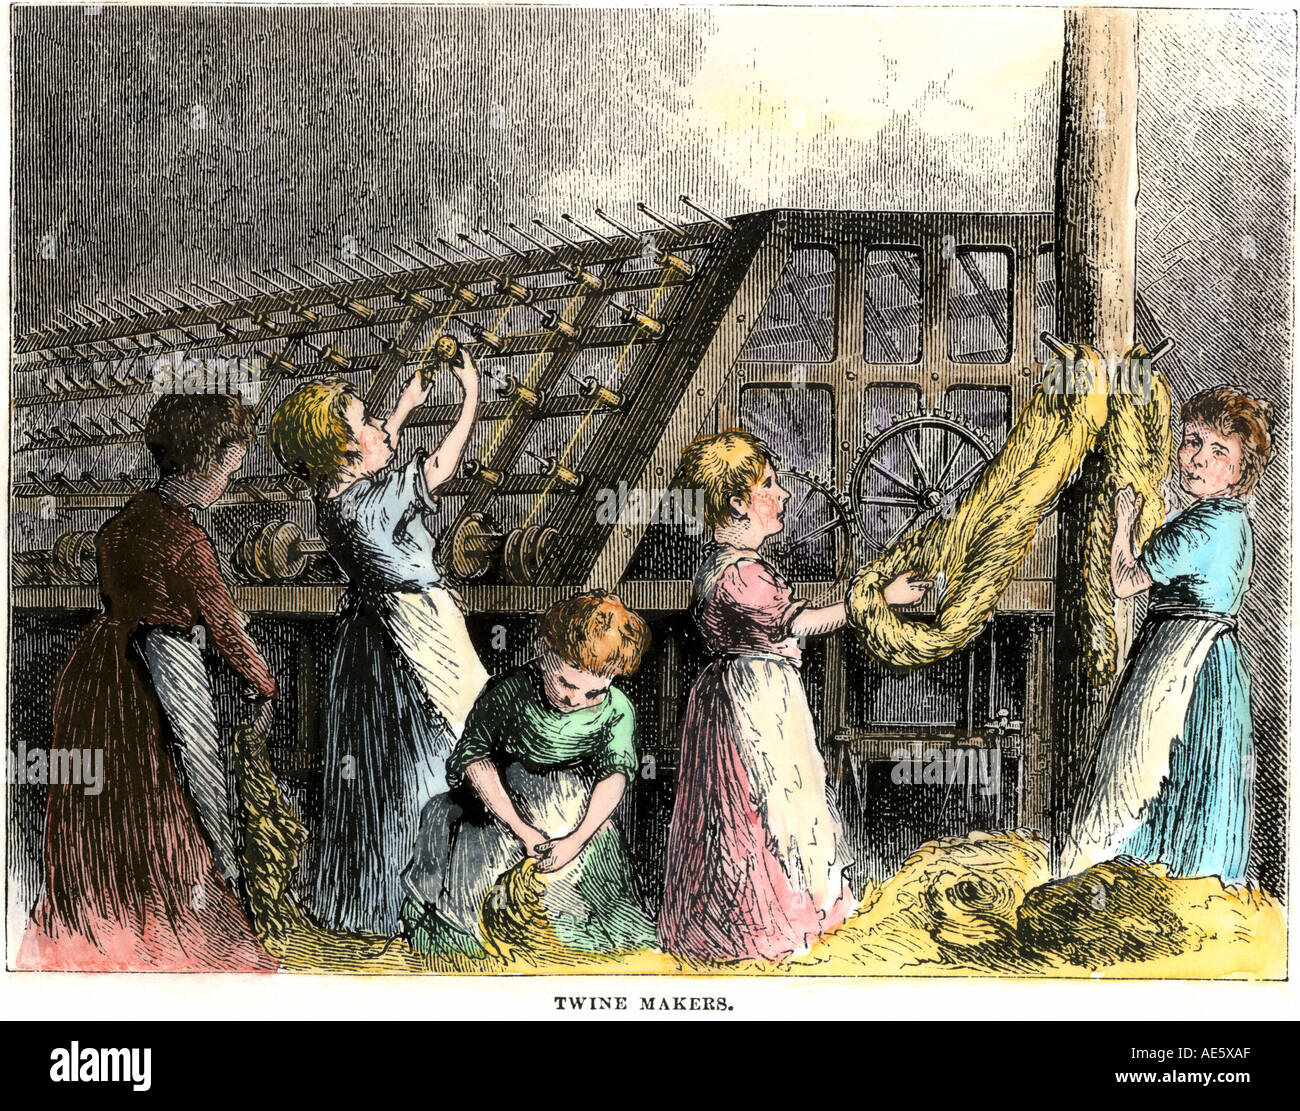 Children laboring in a twine factory, New York City 1870s. Hand-colored woodcut Stock Photo